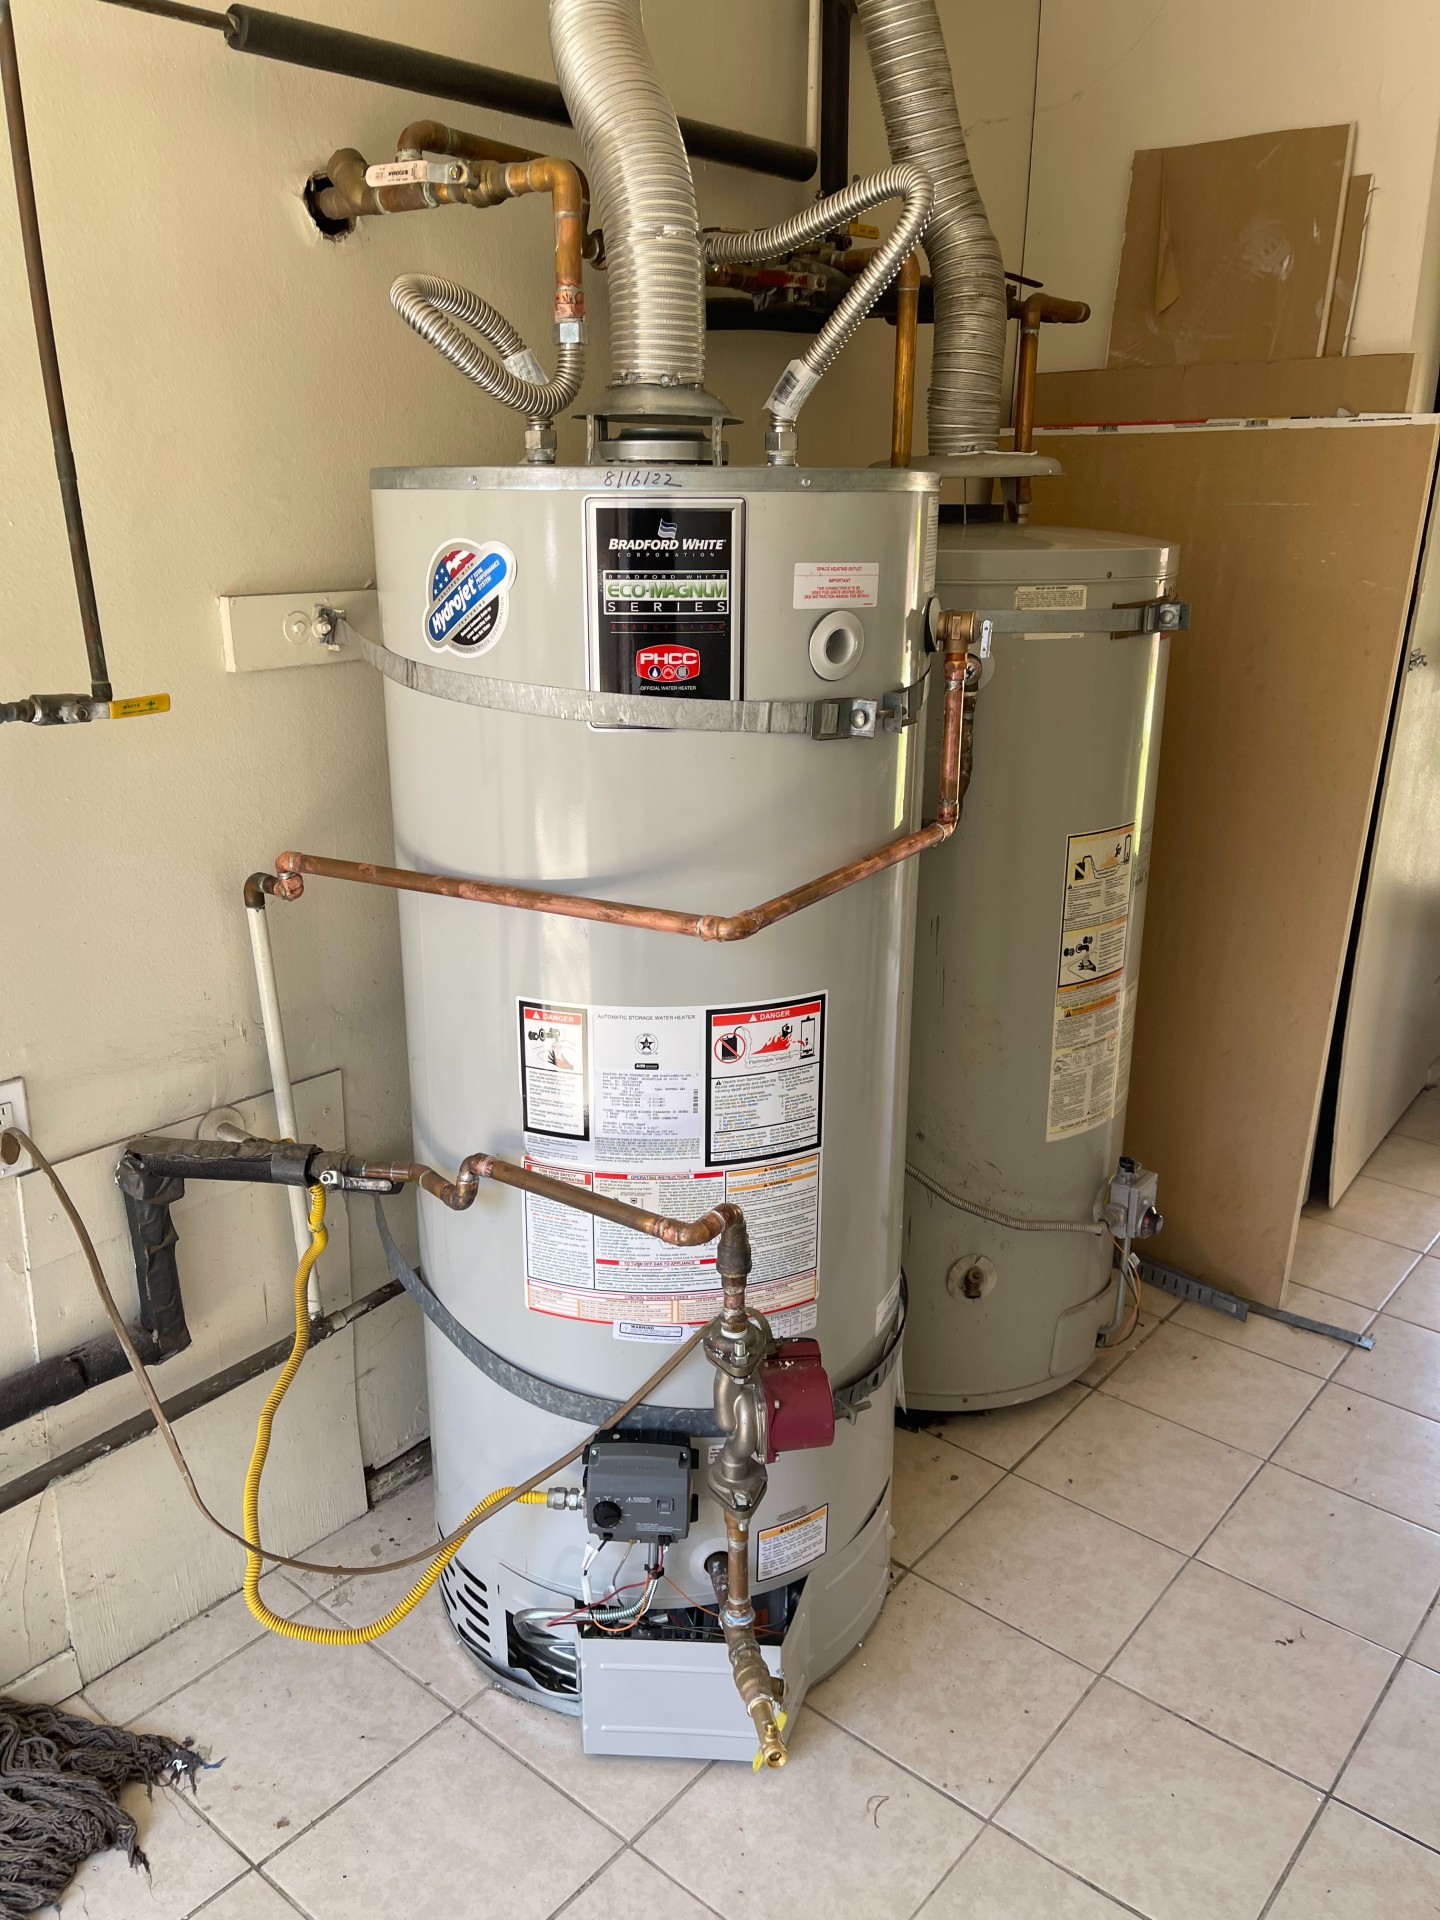 75 Gallon Water Heater Commercial Grade with Circulating Pump